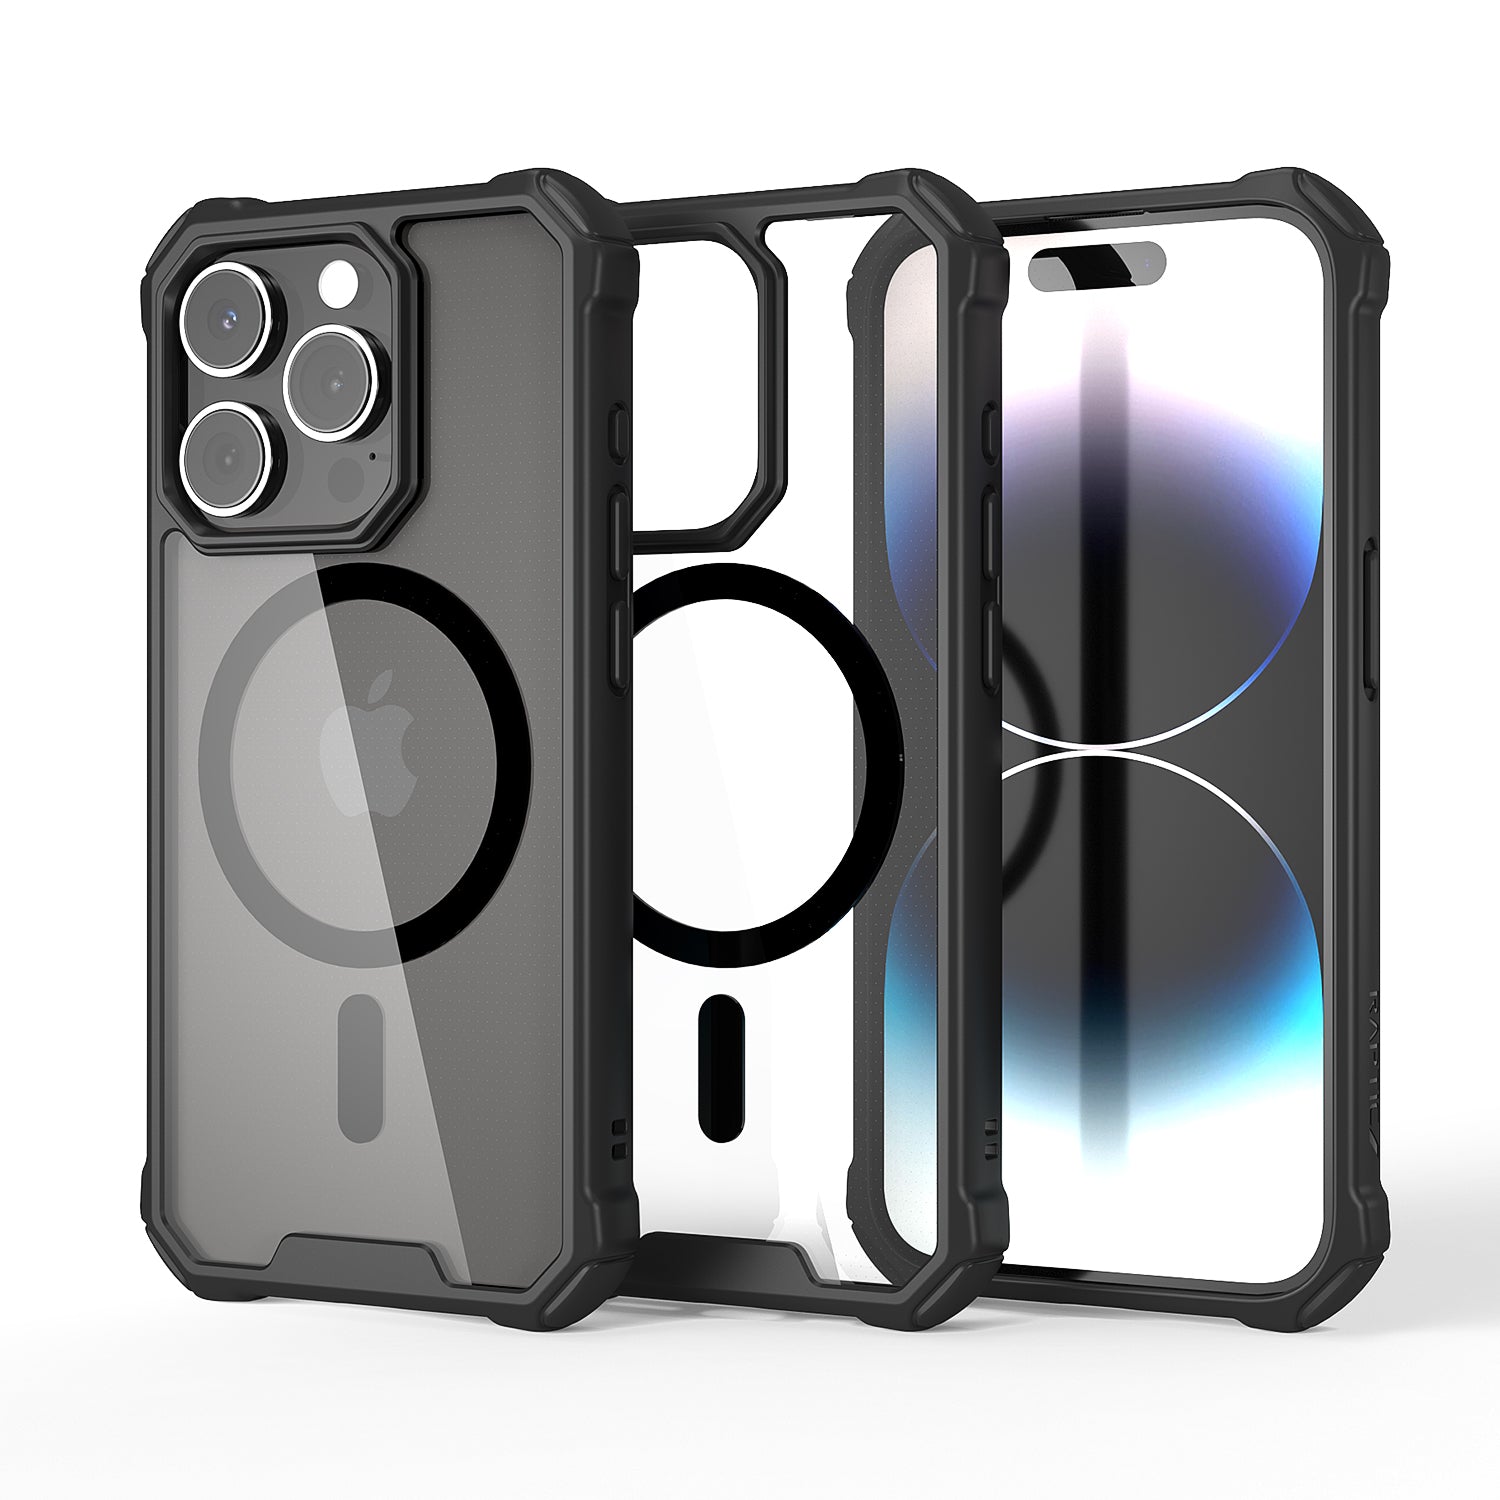 A rugged black Raptic phone case displayed beside an iPhone, featuring MagSafe compatibility and highlighting its protective design with precise cutouts for the camera and buttons.